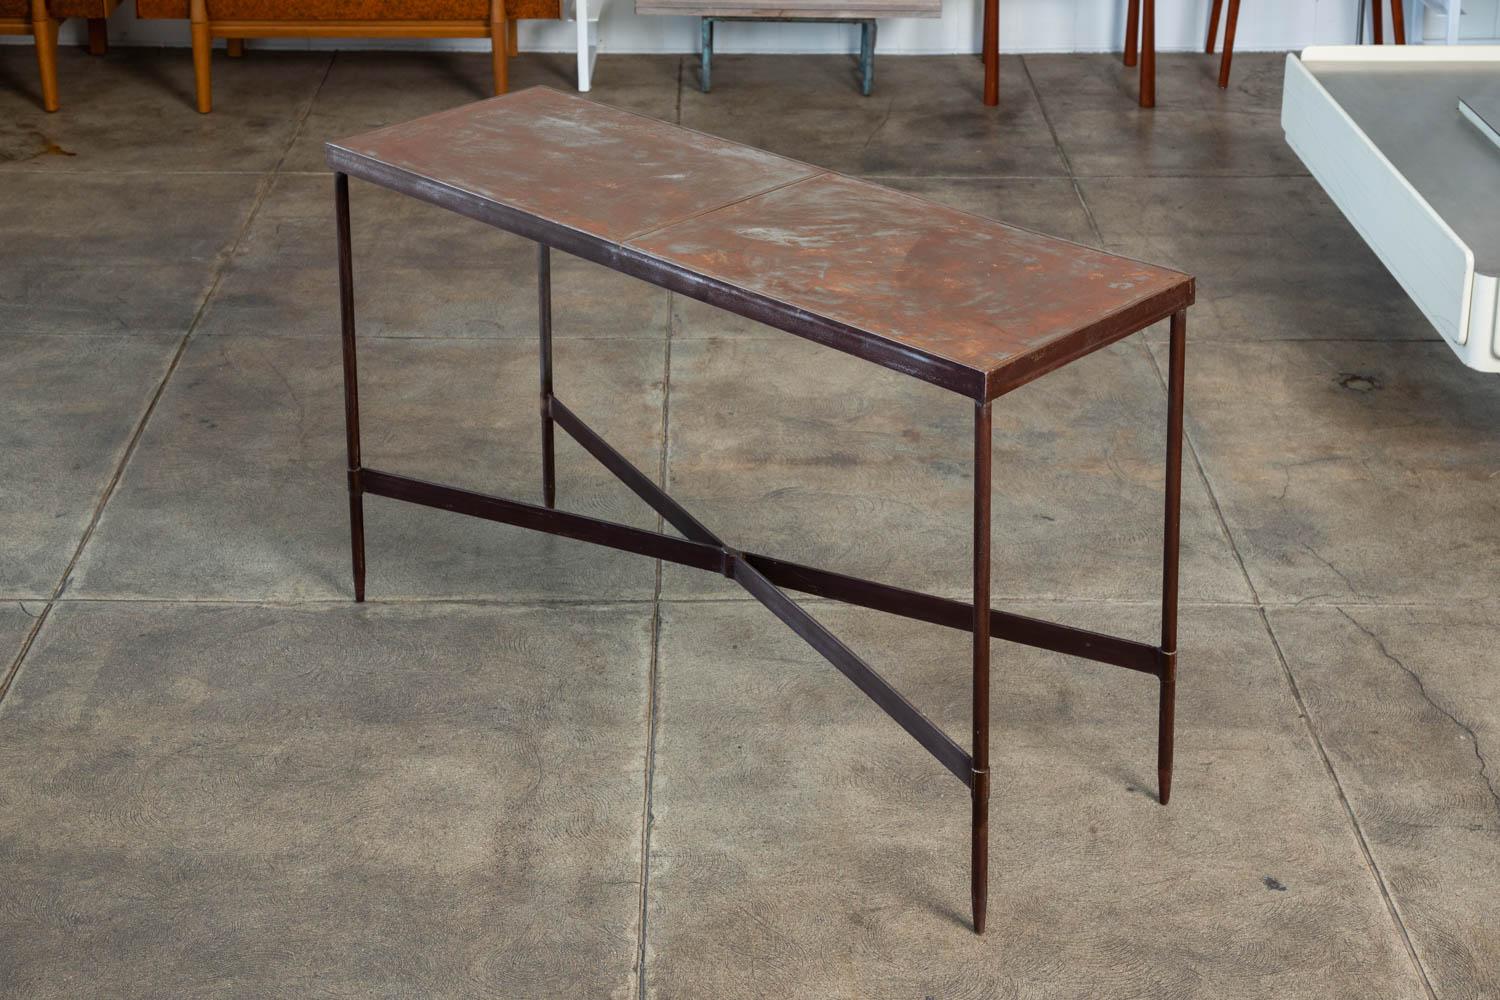 Solid steel console table with great original patina. The table features a narrow rectangular top that sits atop thin solid metal legs and “X” shaped stretcher bars.

Condition: Good vintage condition.

Dimensions: 48” width x 16.25” depth x